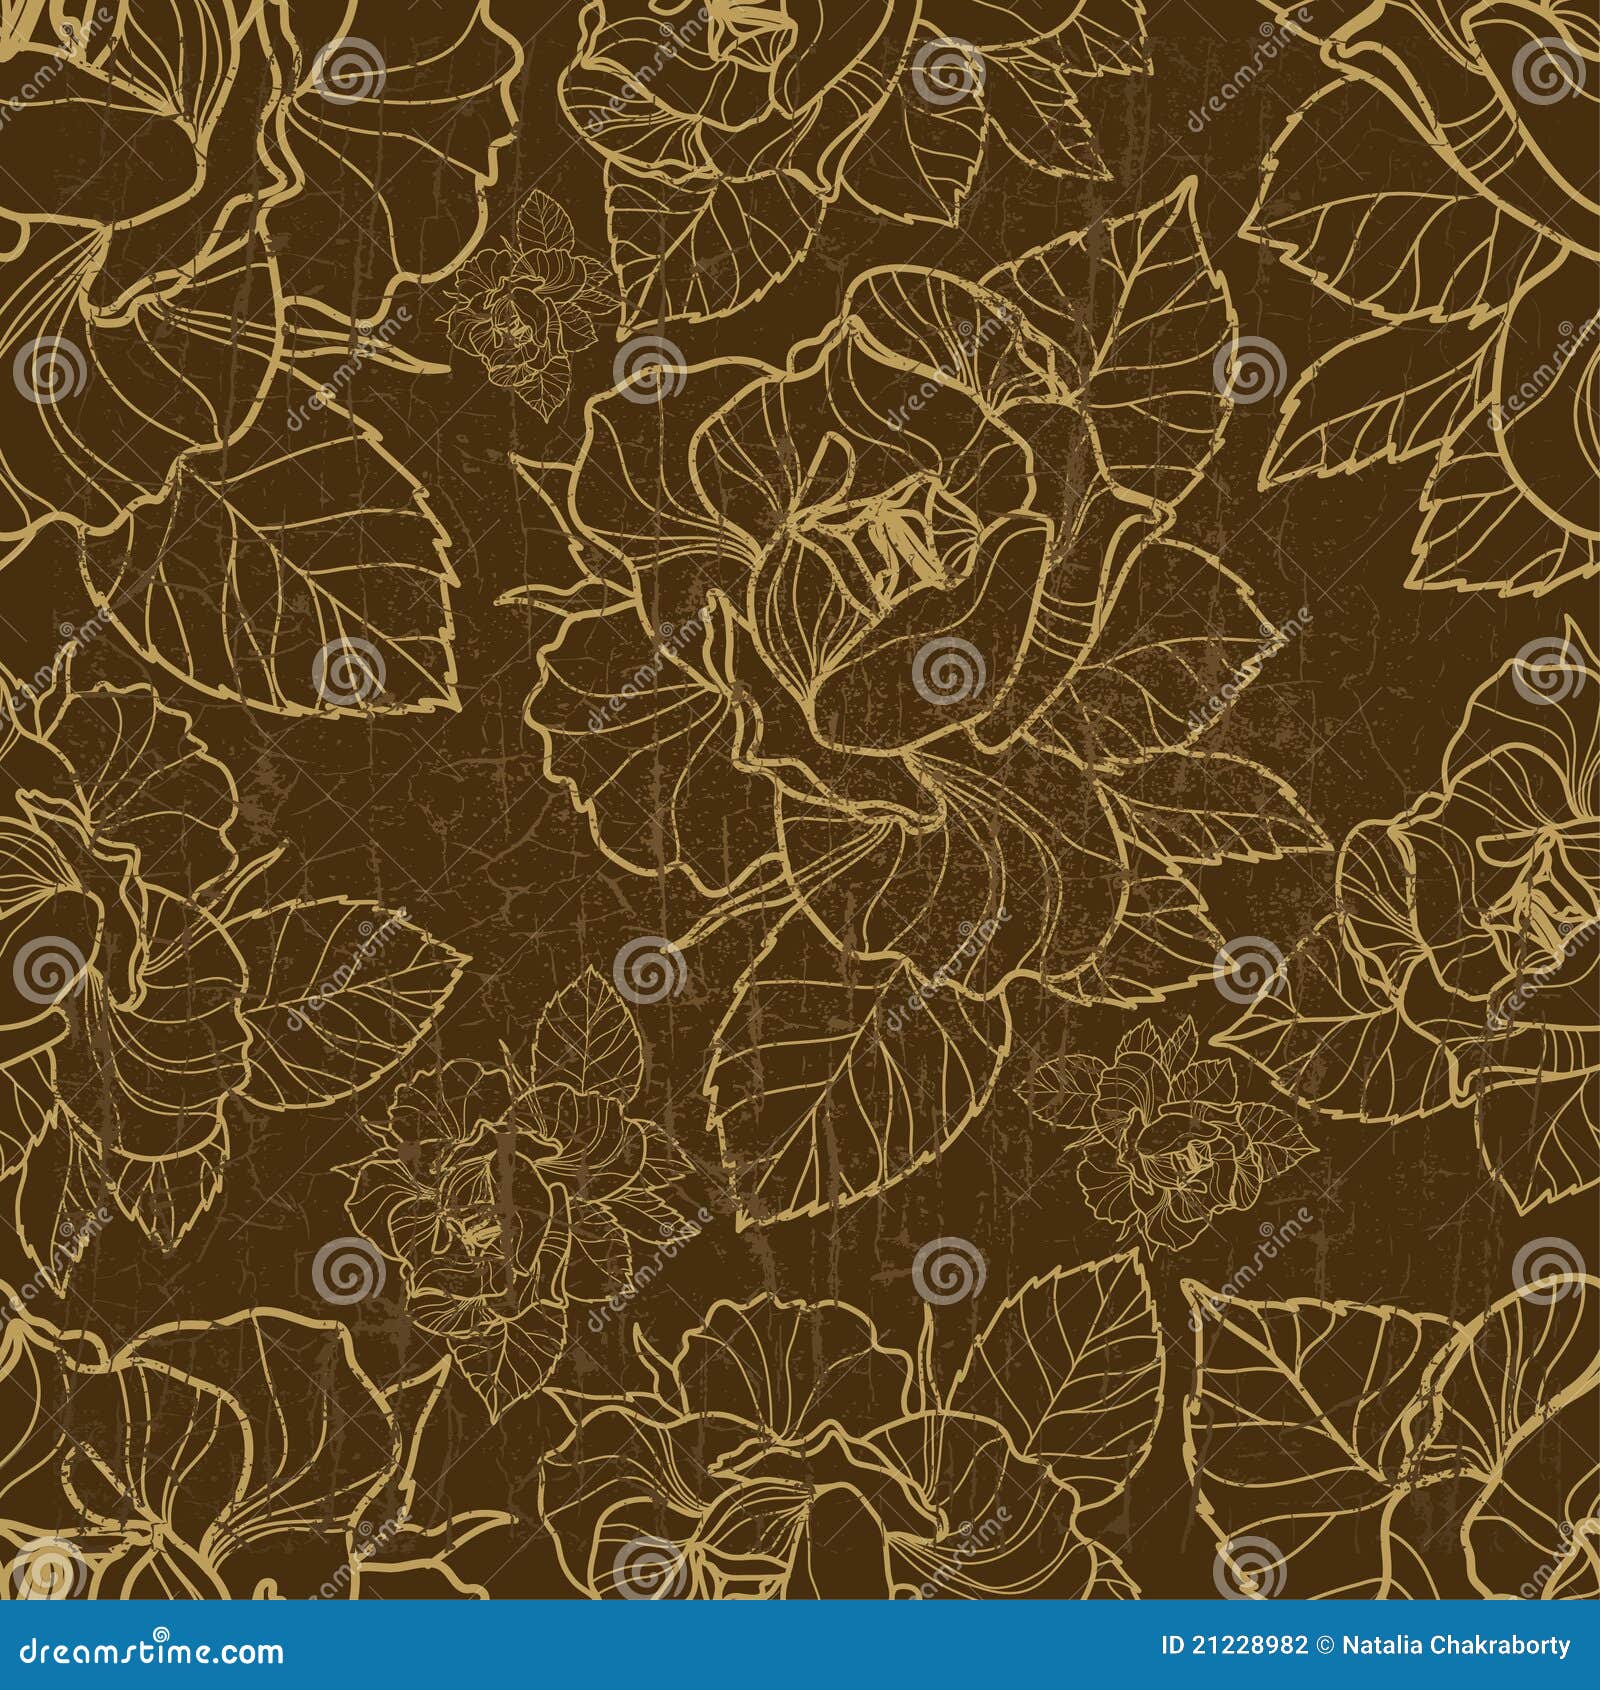  seamless floral pattern with herbarium